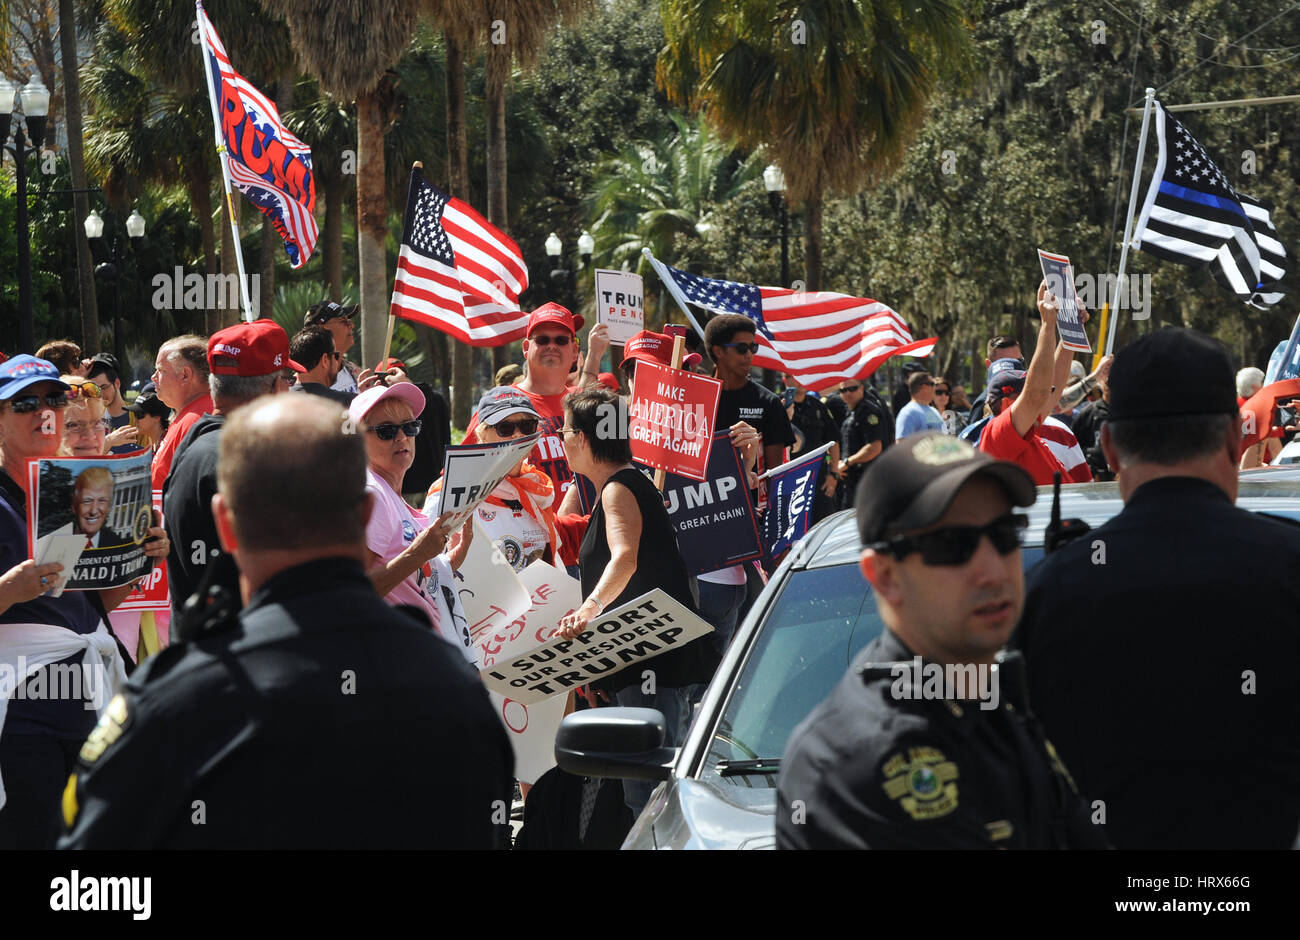 Orlando, Florida, USA. March 4, 2017. Supporters of U.S. President Donald Trump hold a rally and march at Lake Eola park in downtown Orlando, Florida on March 4, 2017. Anti-Trump protesters held a counter march across the street, causing verbal clashes between the two groups. Credit: Paul Hennessy/Alamy Live News Stock Photo